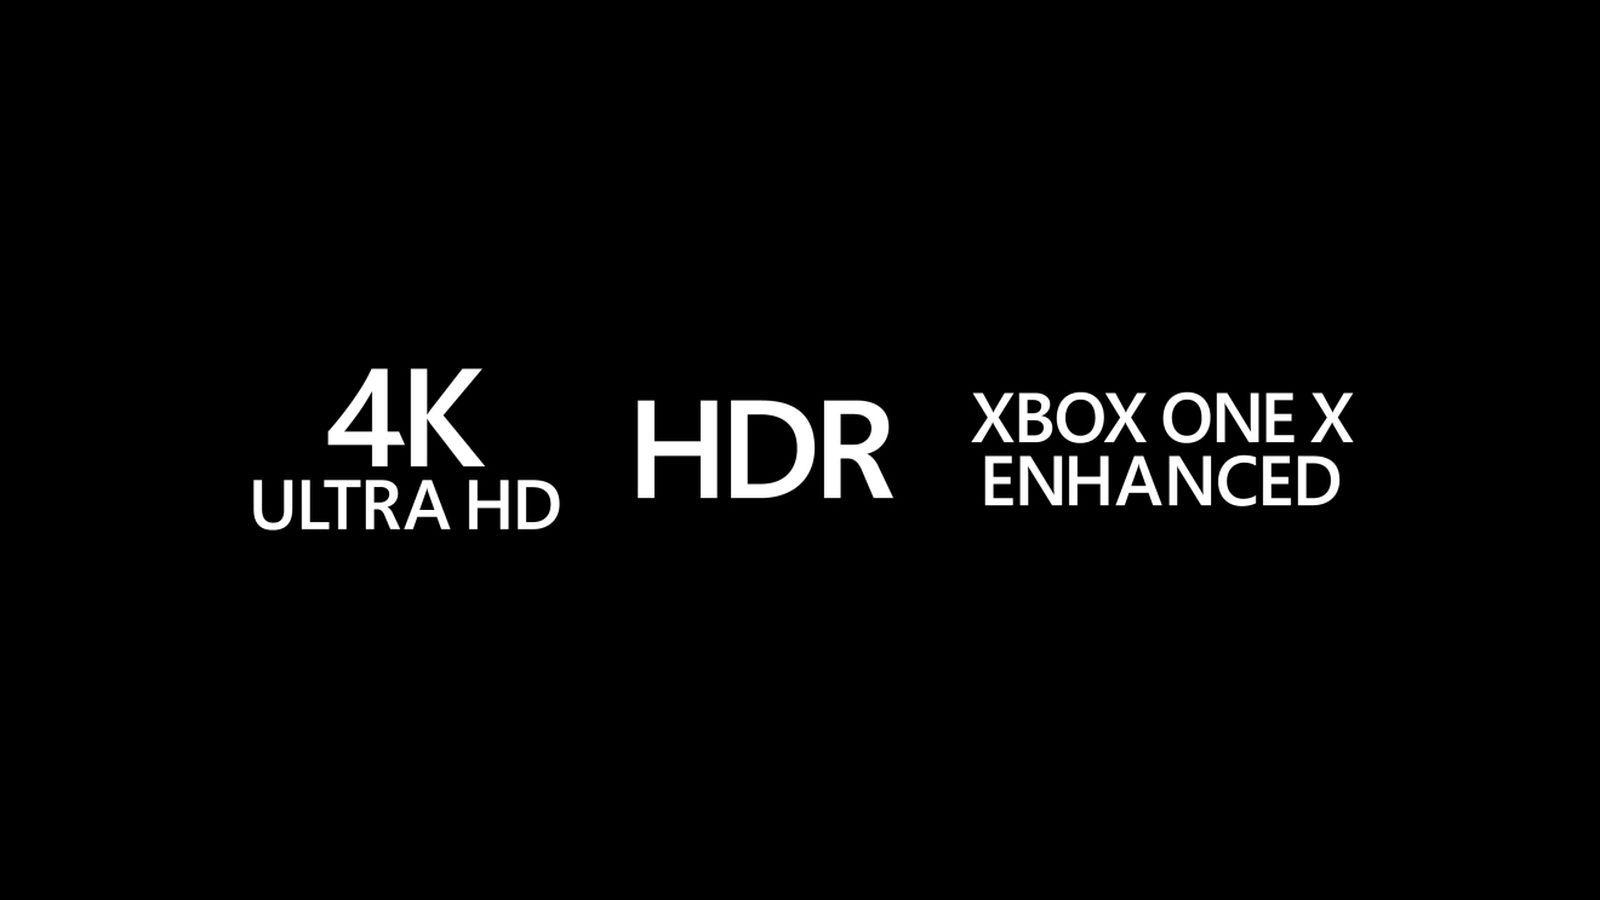 HDR Logo - Look for these Xbox One X logos to know you're getting enhanced 4K